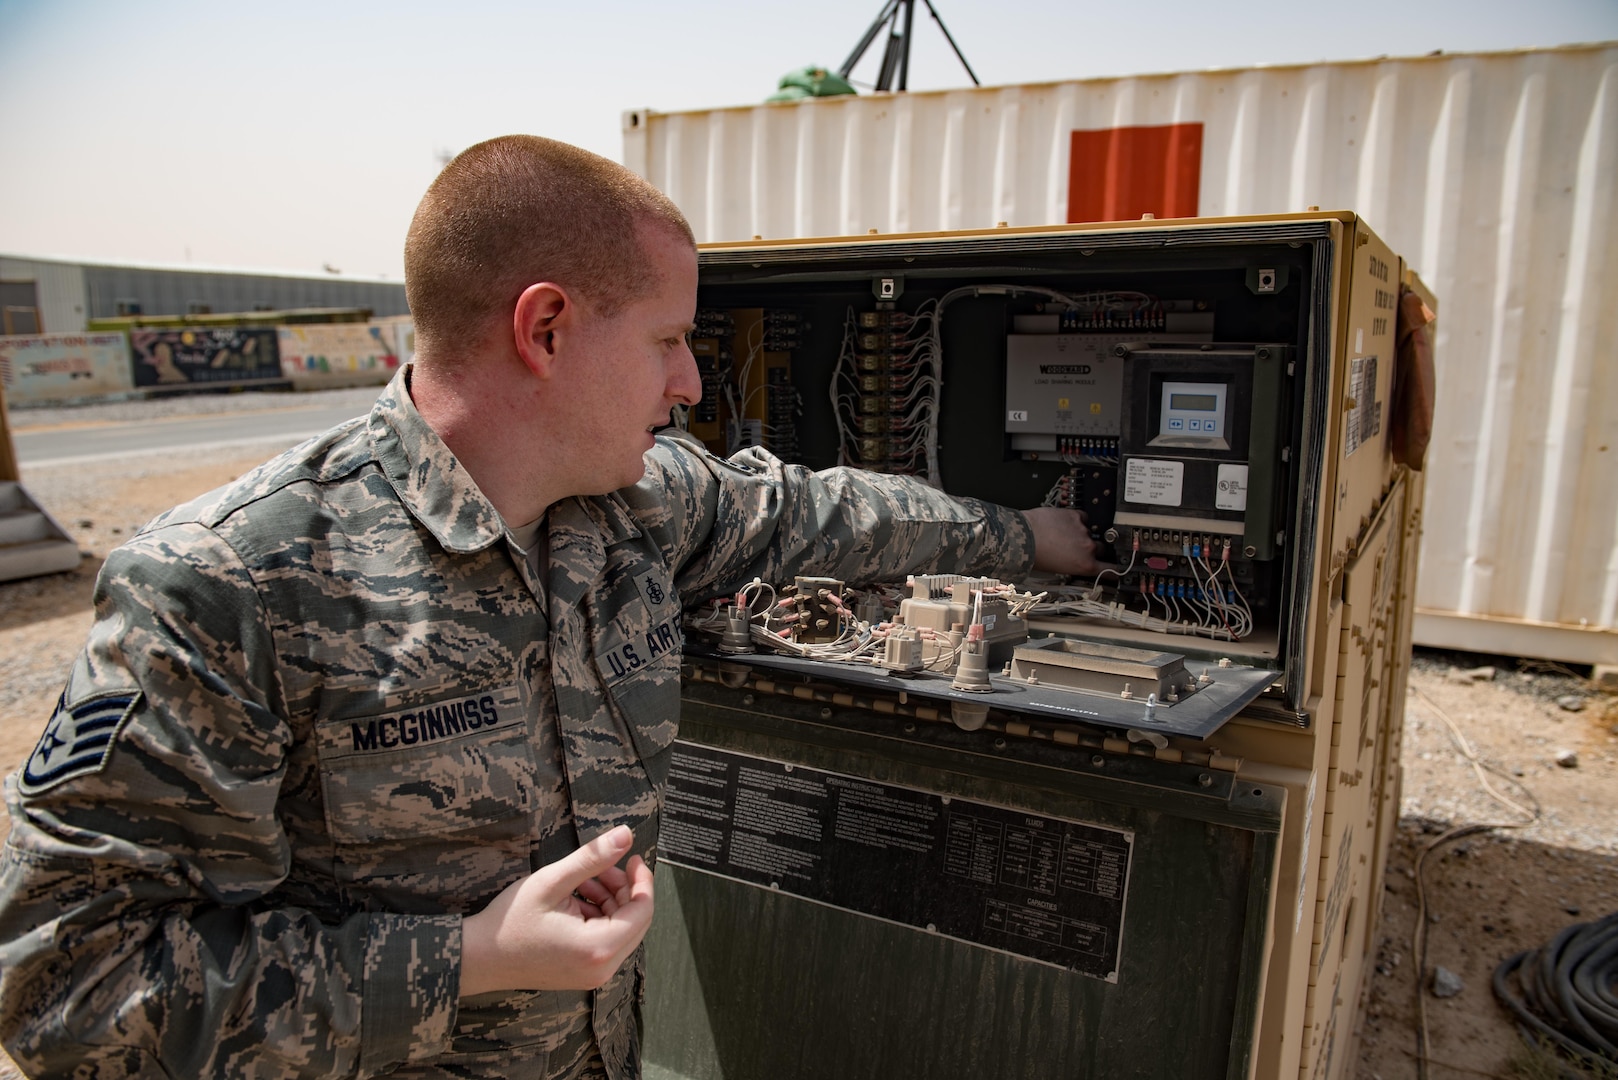 Staff Sgt. Ryan McGinniss, a biomedical equipment technician with the 332nd Expeditionary Medical Group, demonstrates troubleshooting procedures on a heating, ventilation and air conditioning unit May 9, 2017, in Southwest Asia. McGinnis is the facility mananger for the only remaining Expeditionary Medical Support System installation  supporting joint and  coalition members deployed to Operation Inherent Resolve. Part of his duties include ensuring consistent cooling and power for medical facilities, including refrigeration of crucial medications and immuniations.(U.S. Air Force photo by Staff Sgt. Alexander W. Riedel)